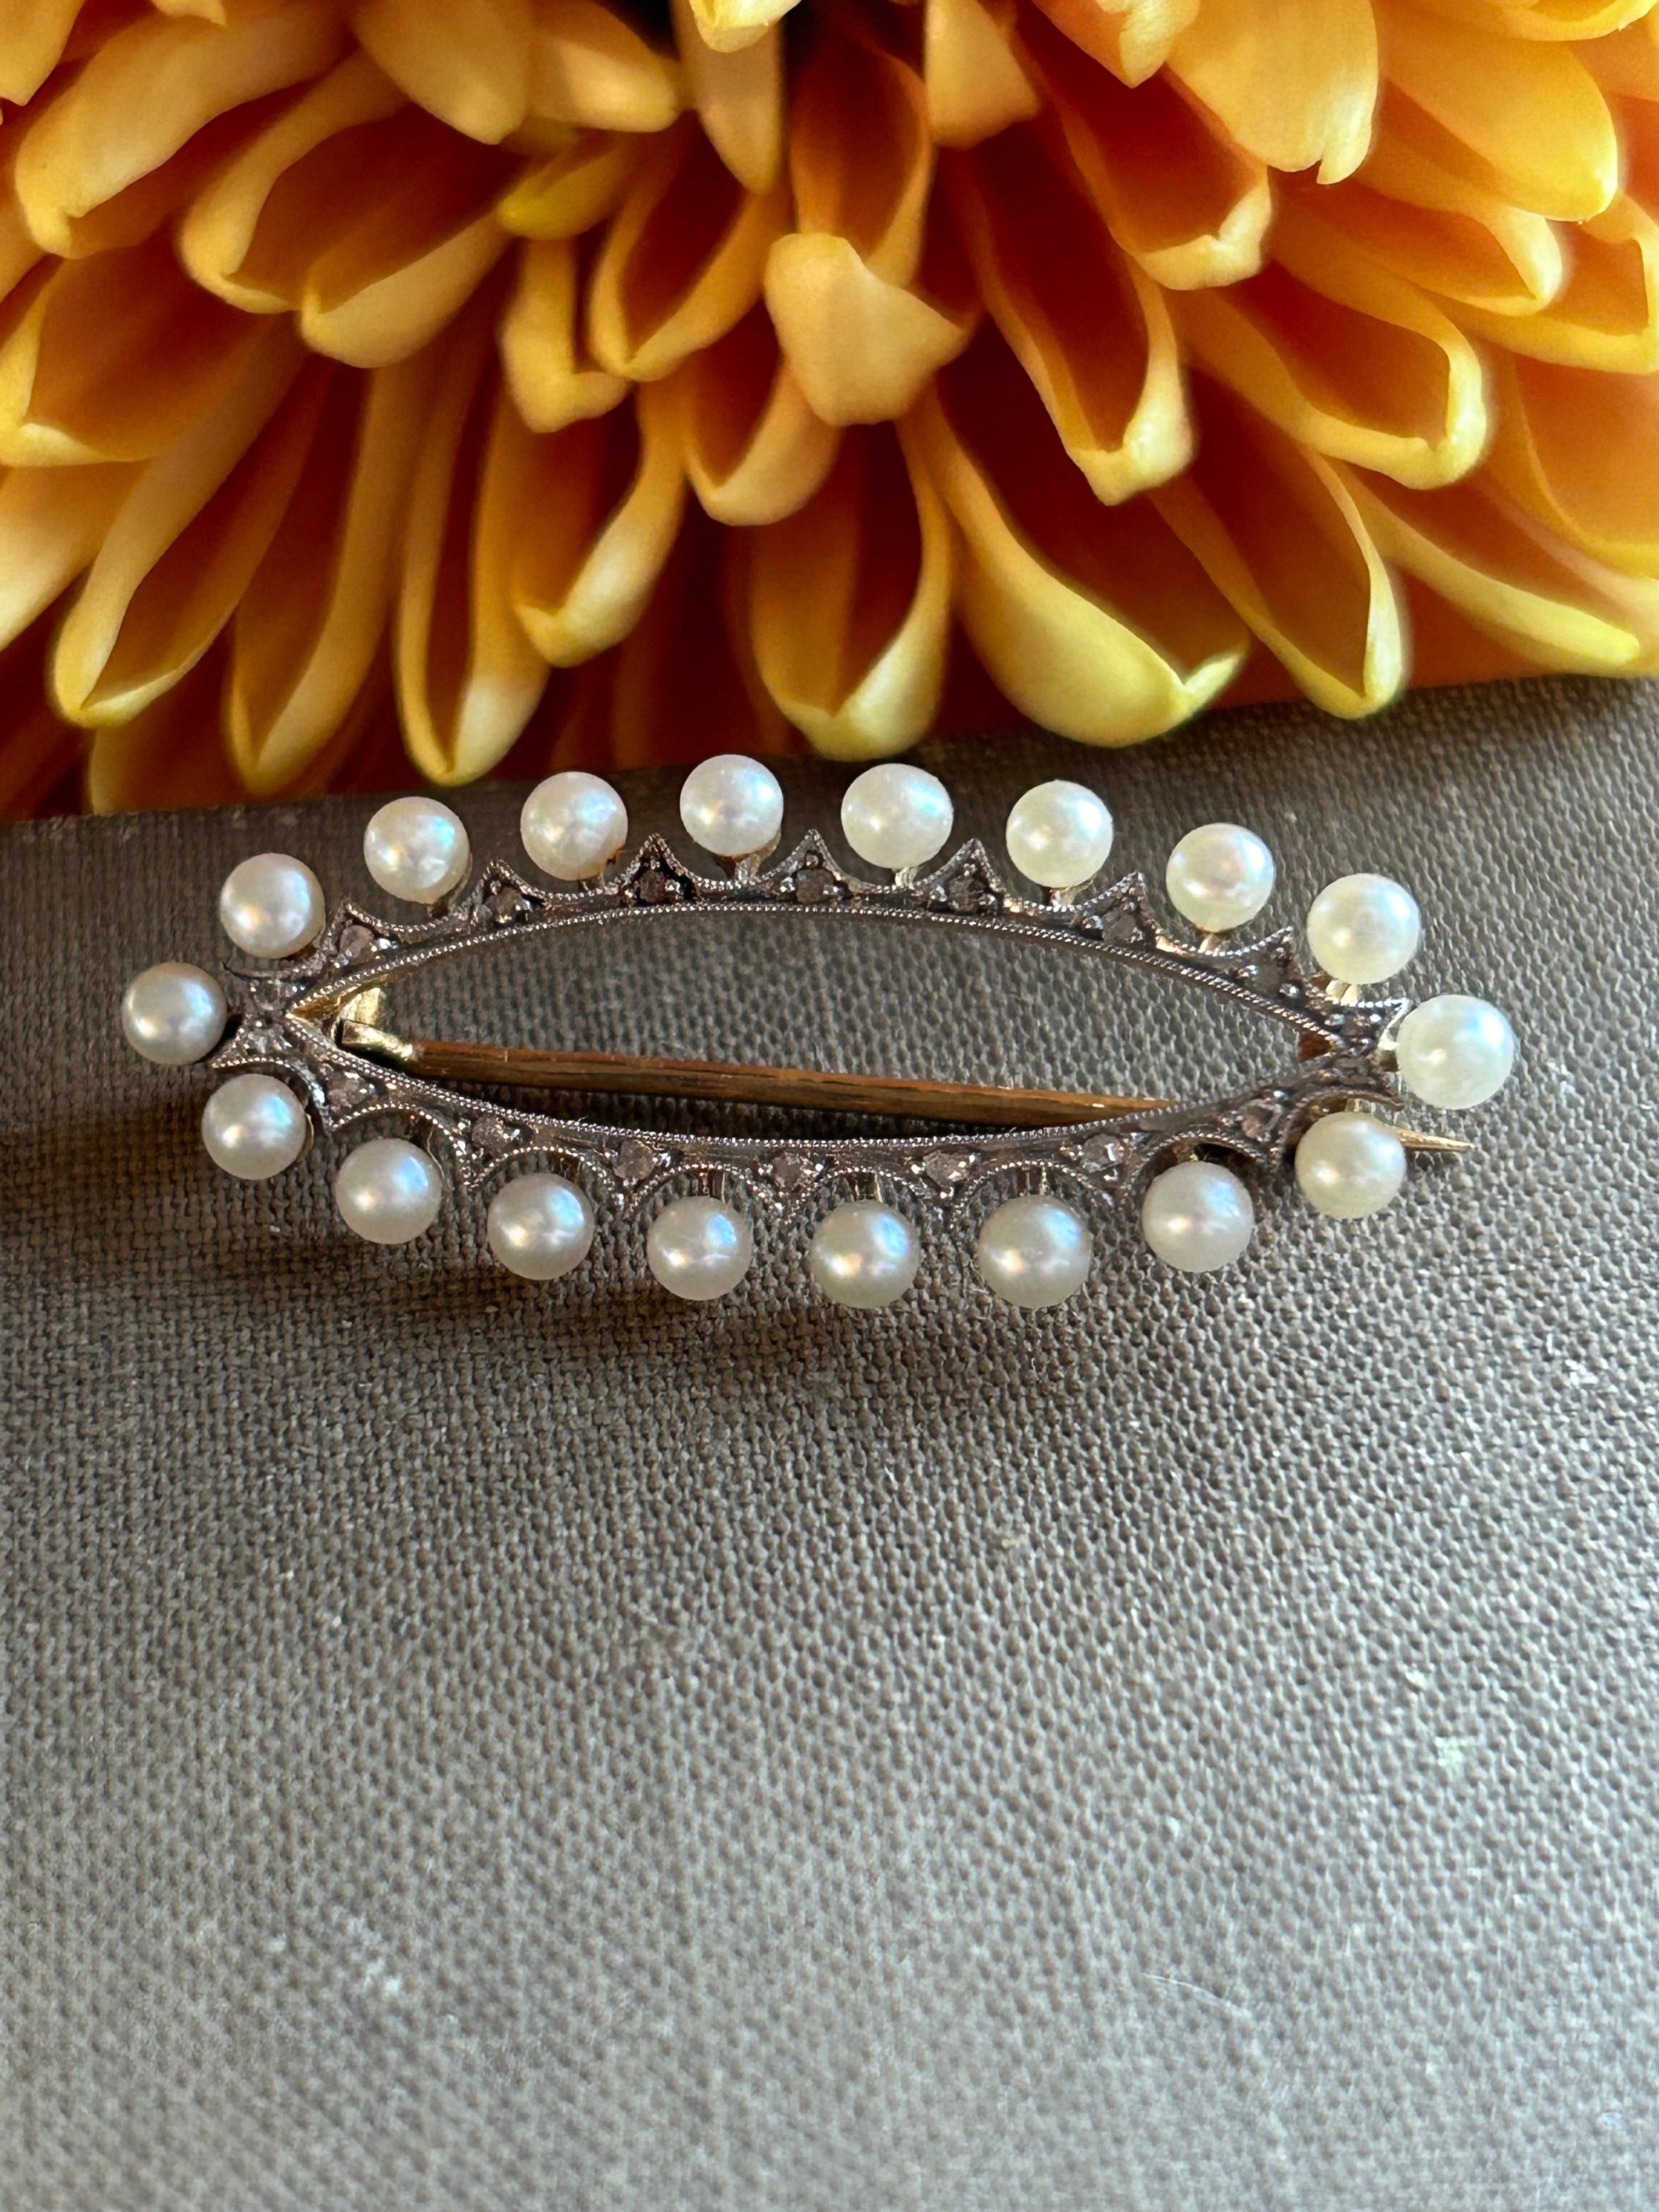 Antique Art Deco Pearl and Diamond 18ct Gold and Platinum Brooch with Enclosed Gold Back.
An exquisitely designed Art Deco Pearl and Diamond Brooch. A Marquise Pearl border and rose cut diamond throughout, stamped 750, 3.6cm, Weight: 3.9 grams